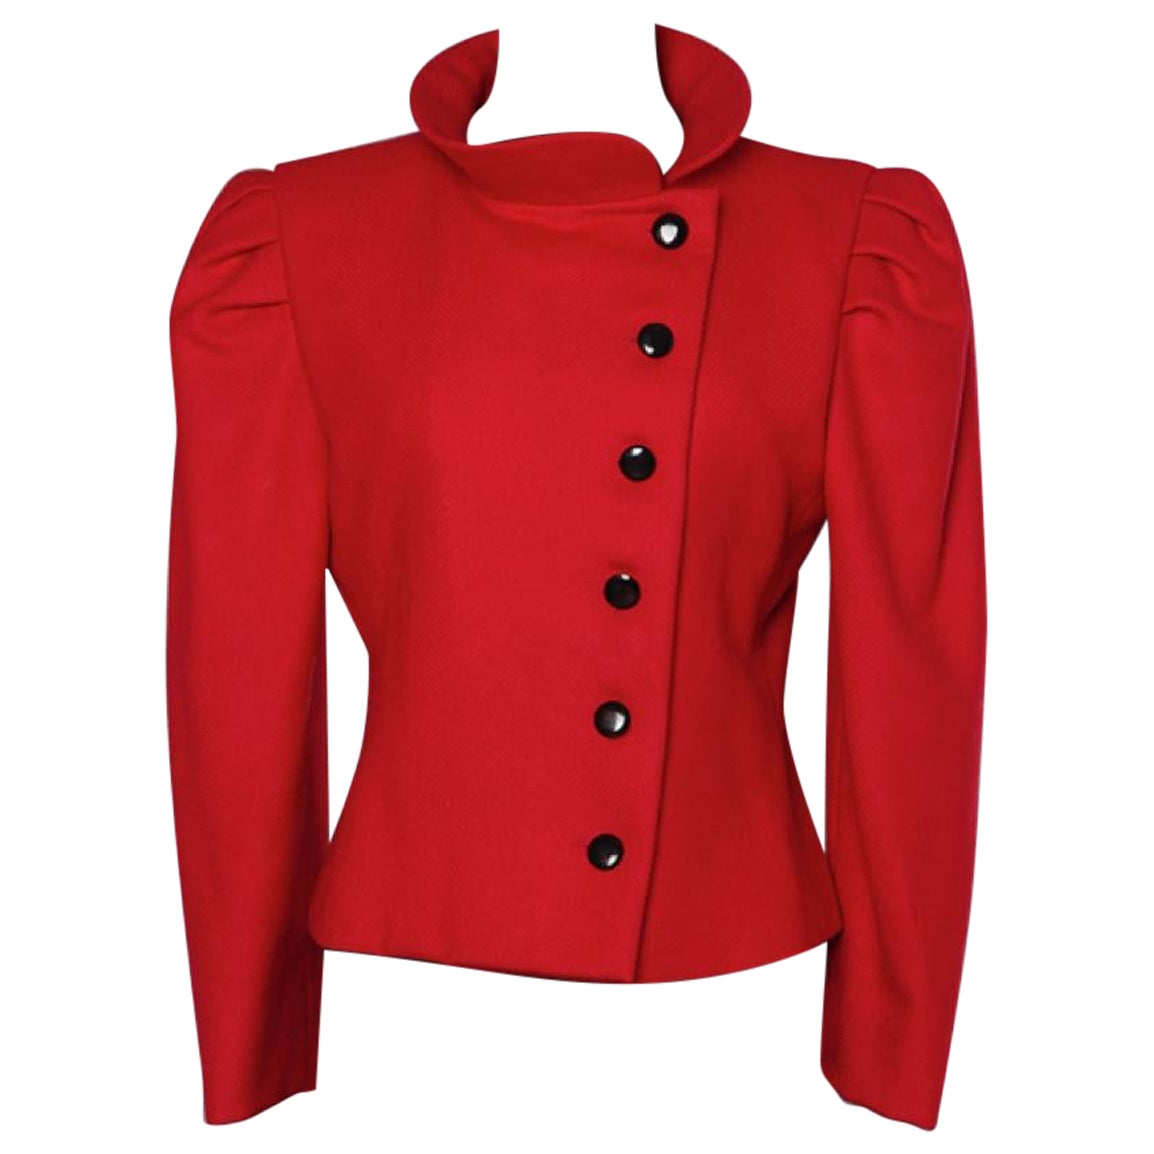 Red thin wool jacket with black buttons Pierre Cardin 